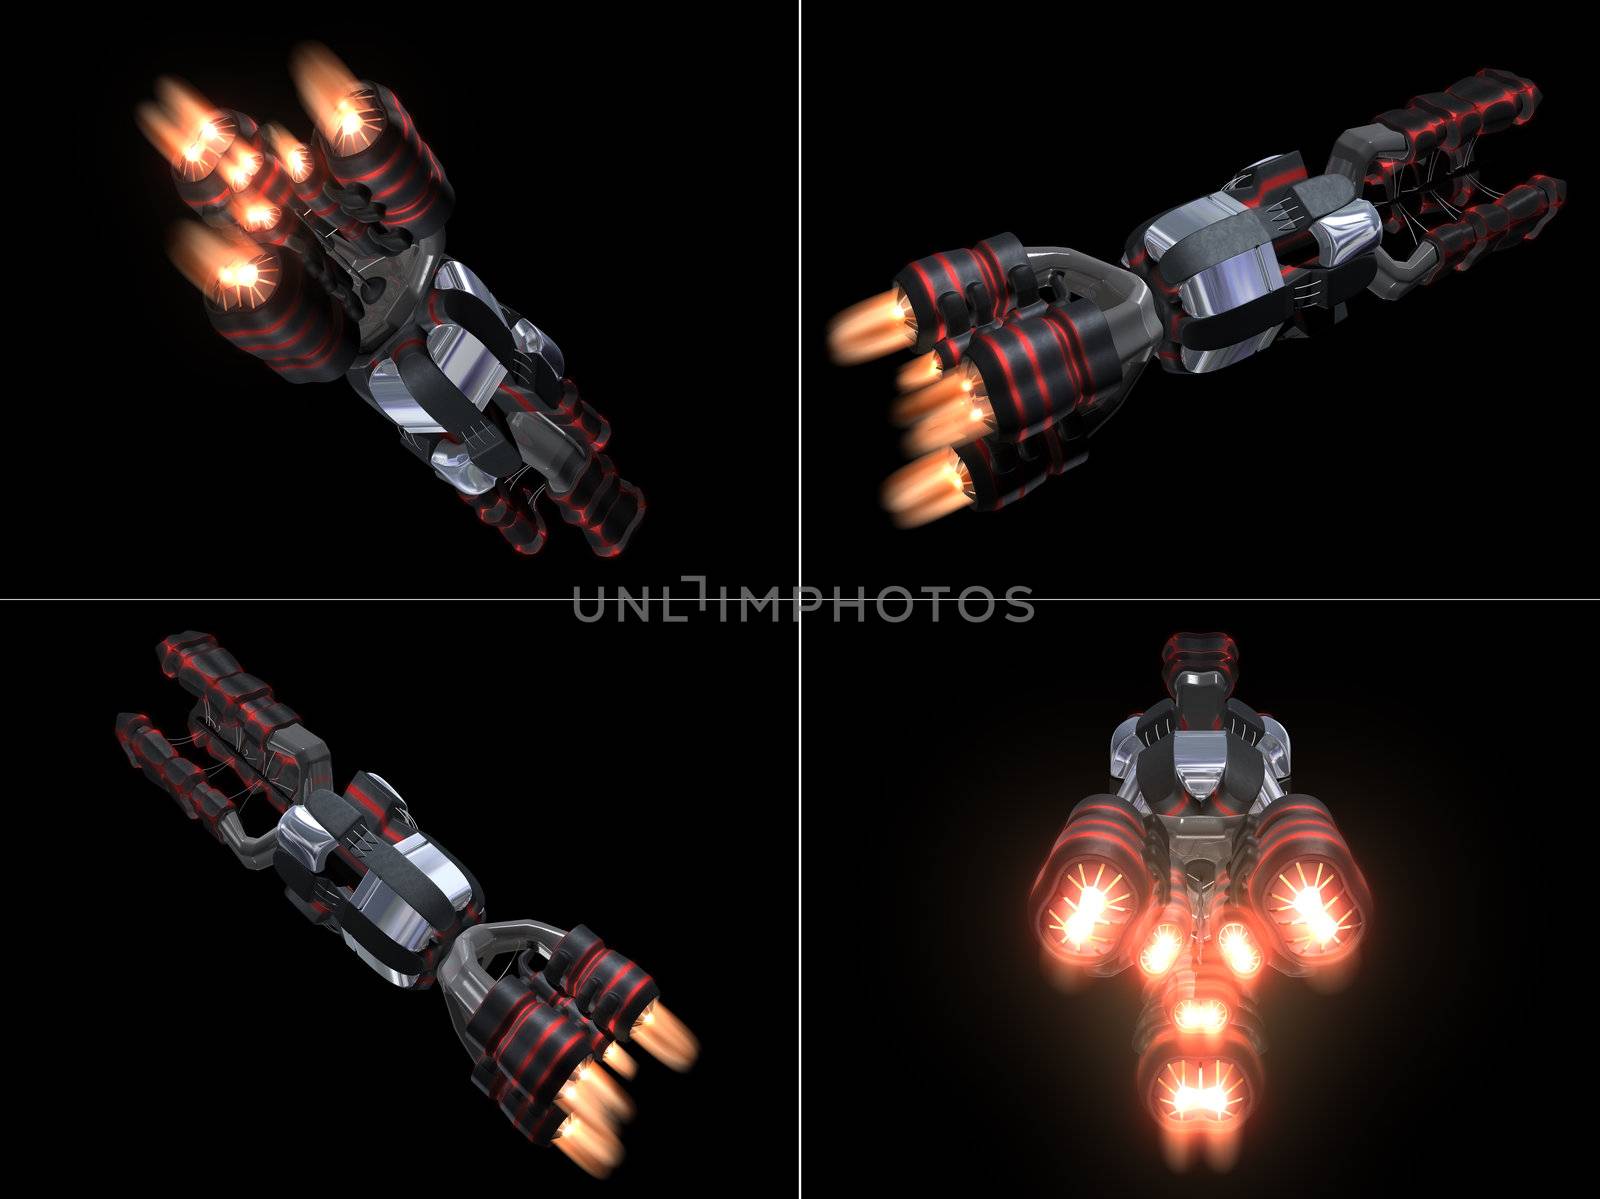 Four Back Views of Black and Red Space Ship by shkyo30